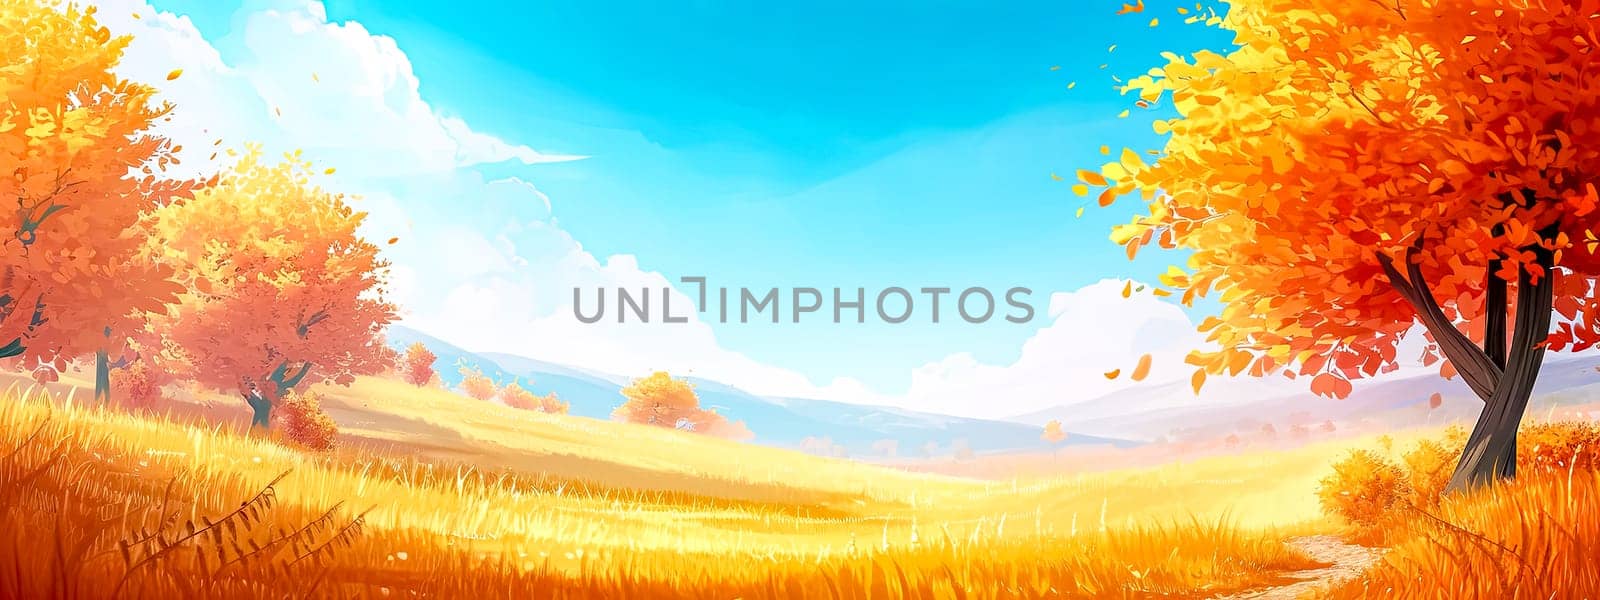 autumnal landscape with golden fields and trees ablaze with orange leaves under a clear blue sky, banner with copy space